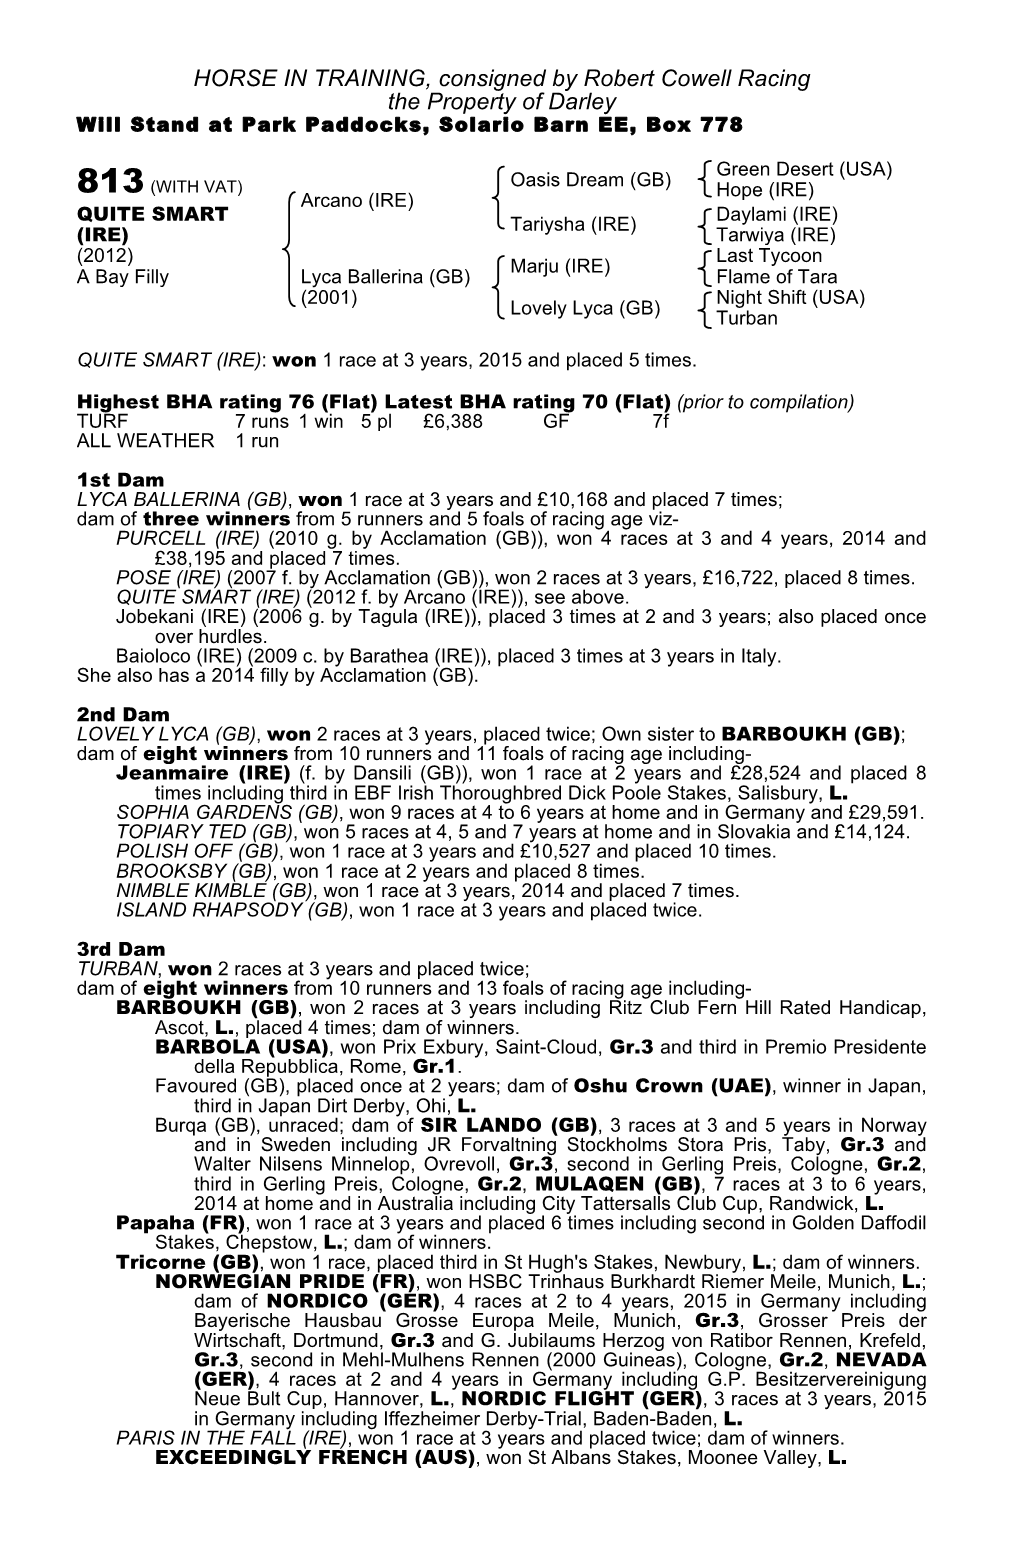 HORSE in TRAINING, Consigned by Robert Cowell Racing the Property of Darley Will Stand at Park Paddocks, Solario Barn EE, Box 778